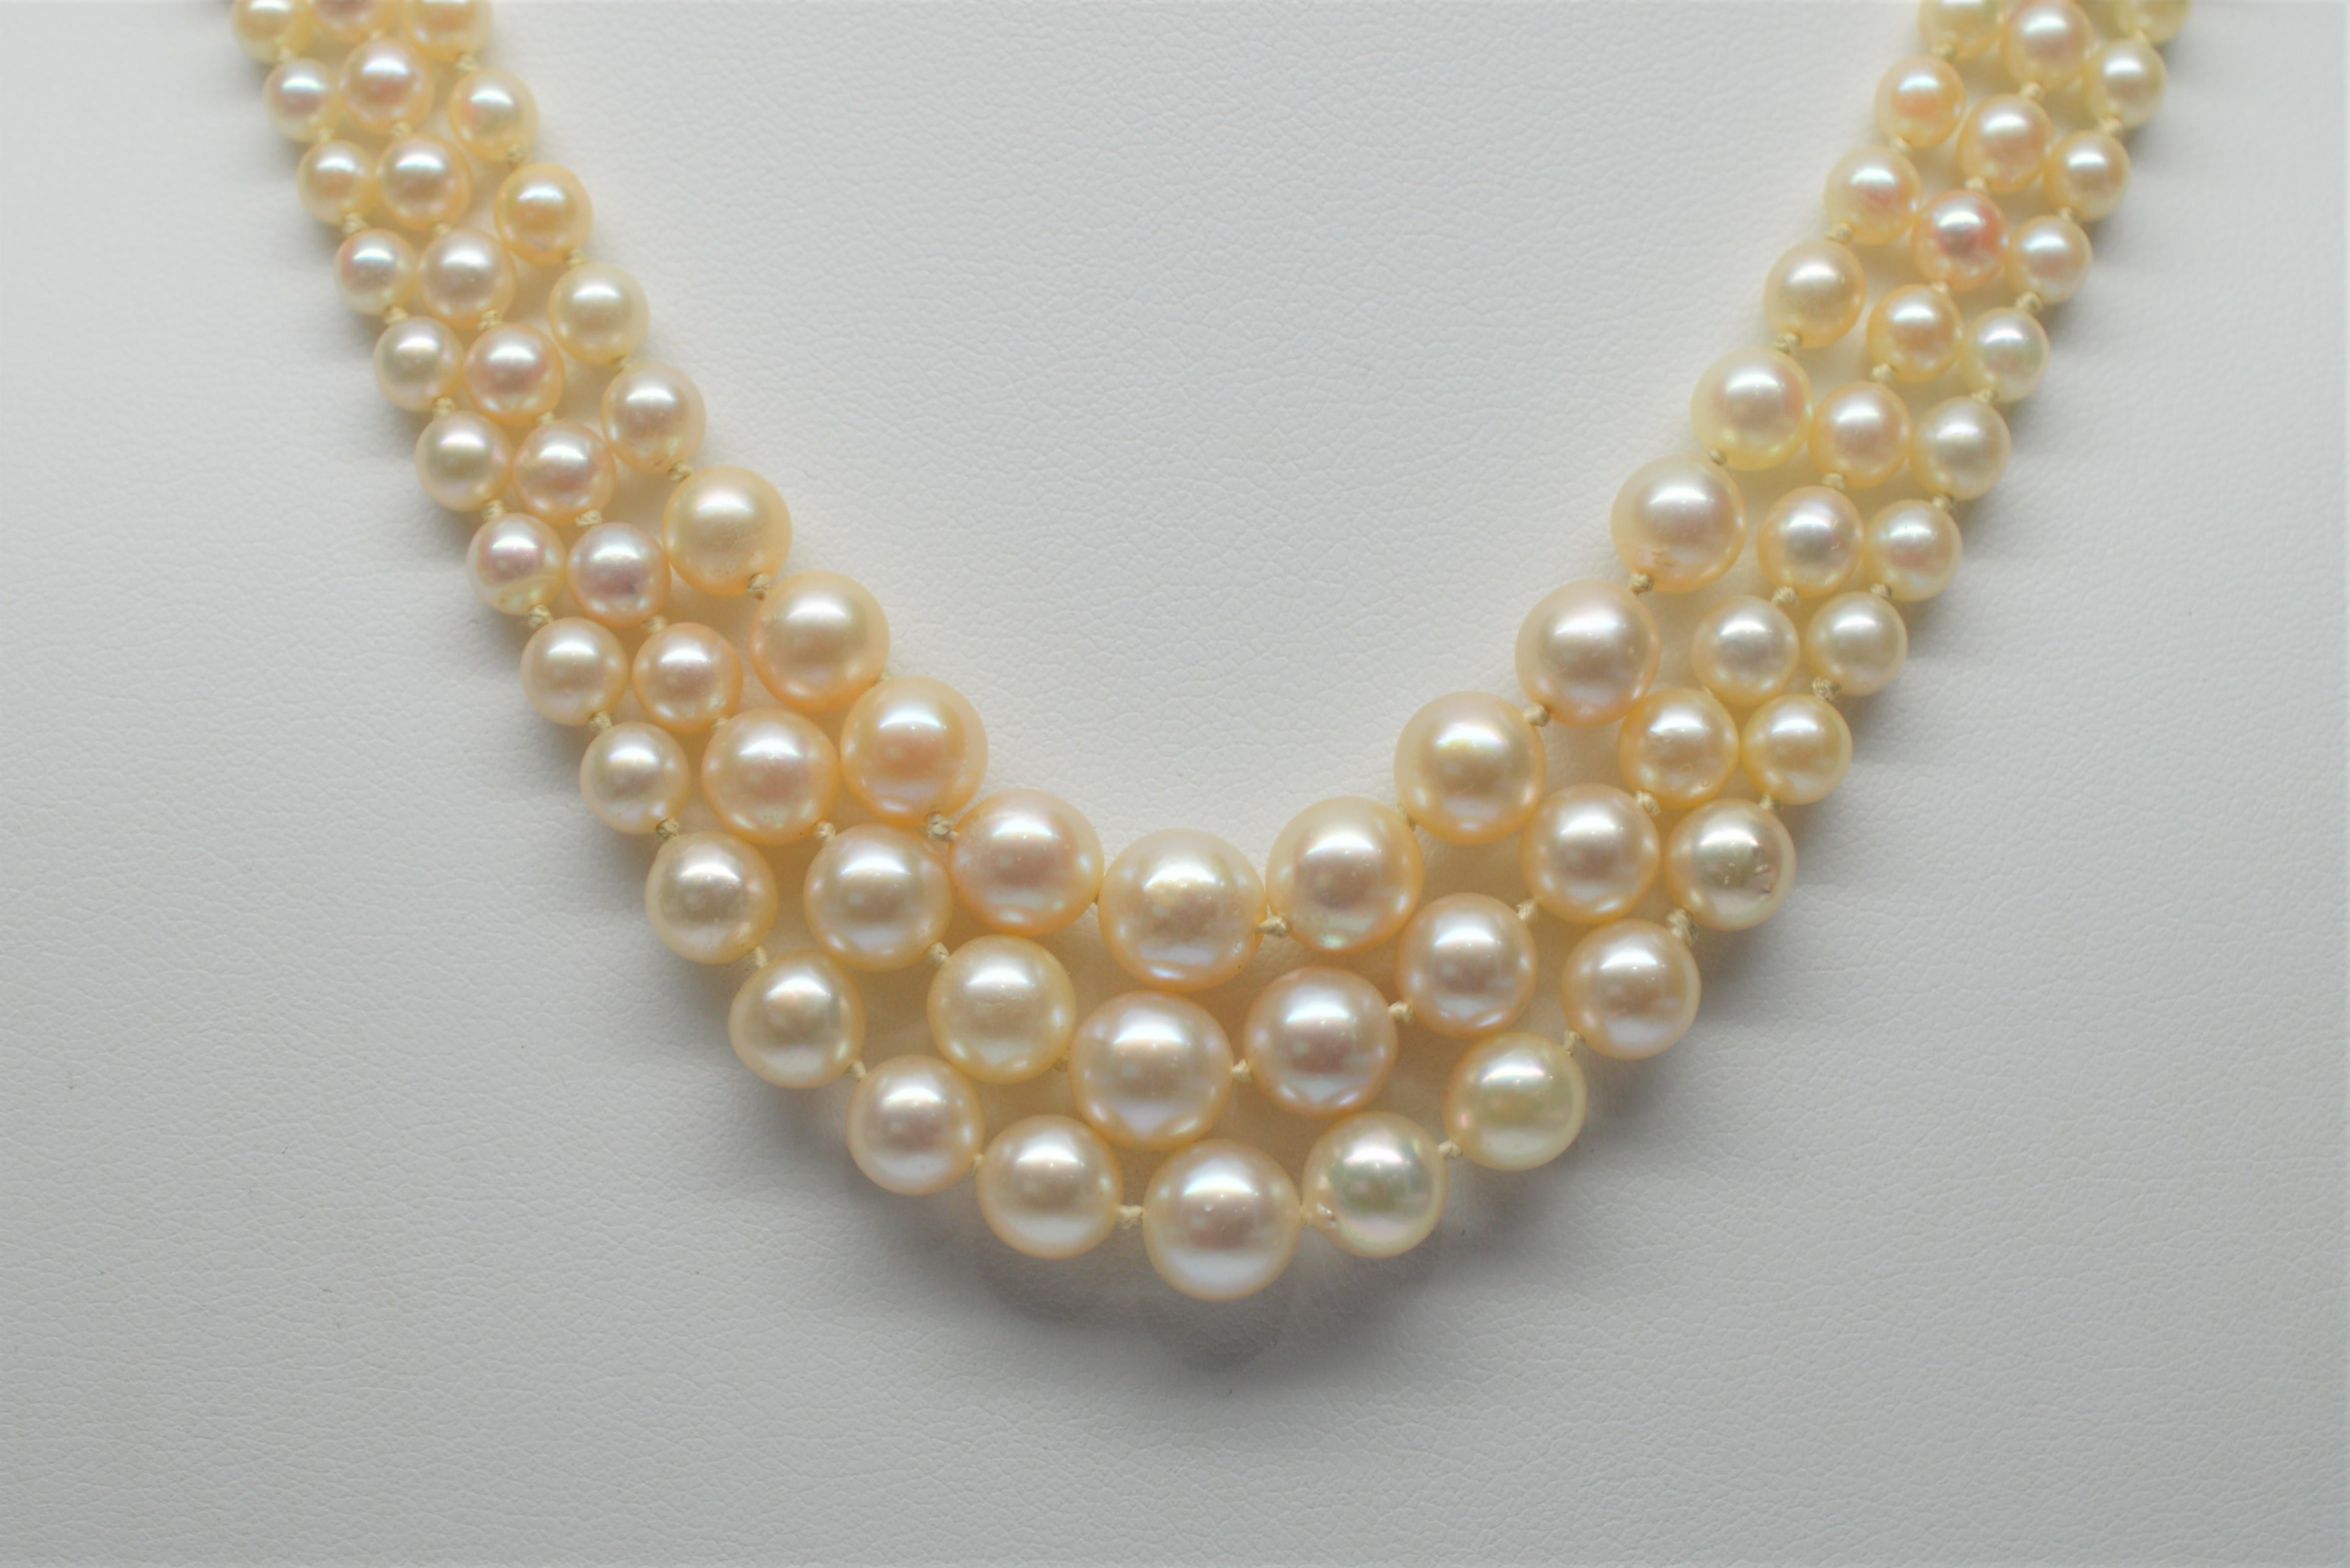 Triple Strand Akoya Pearl Necklace with 14K Yellow Gold & Opal Clasp 4